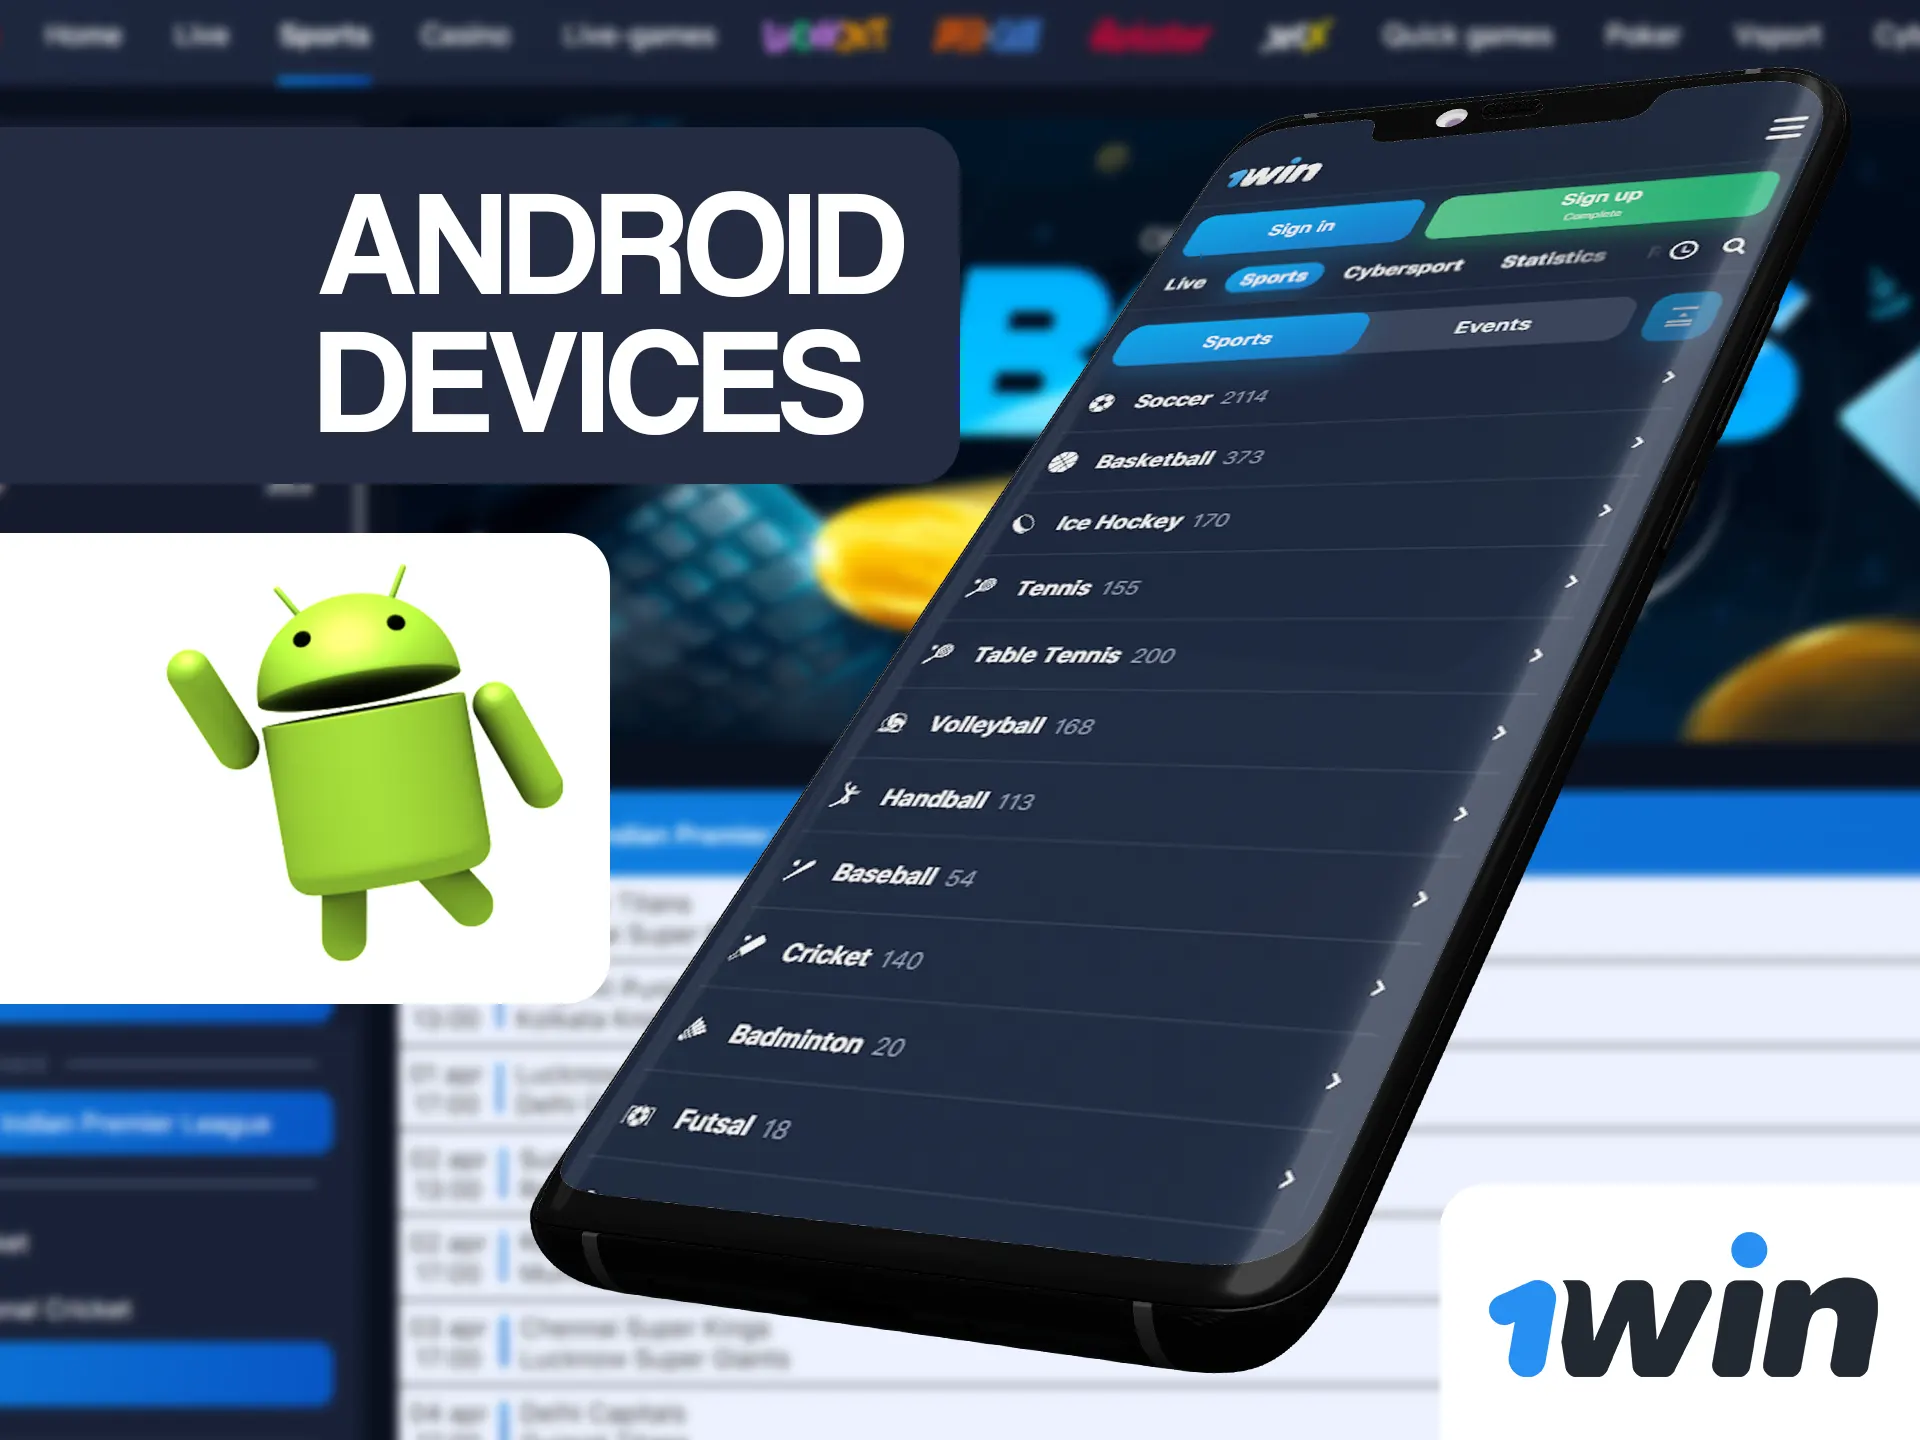 Install 1win app on any of your Android devices.